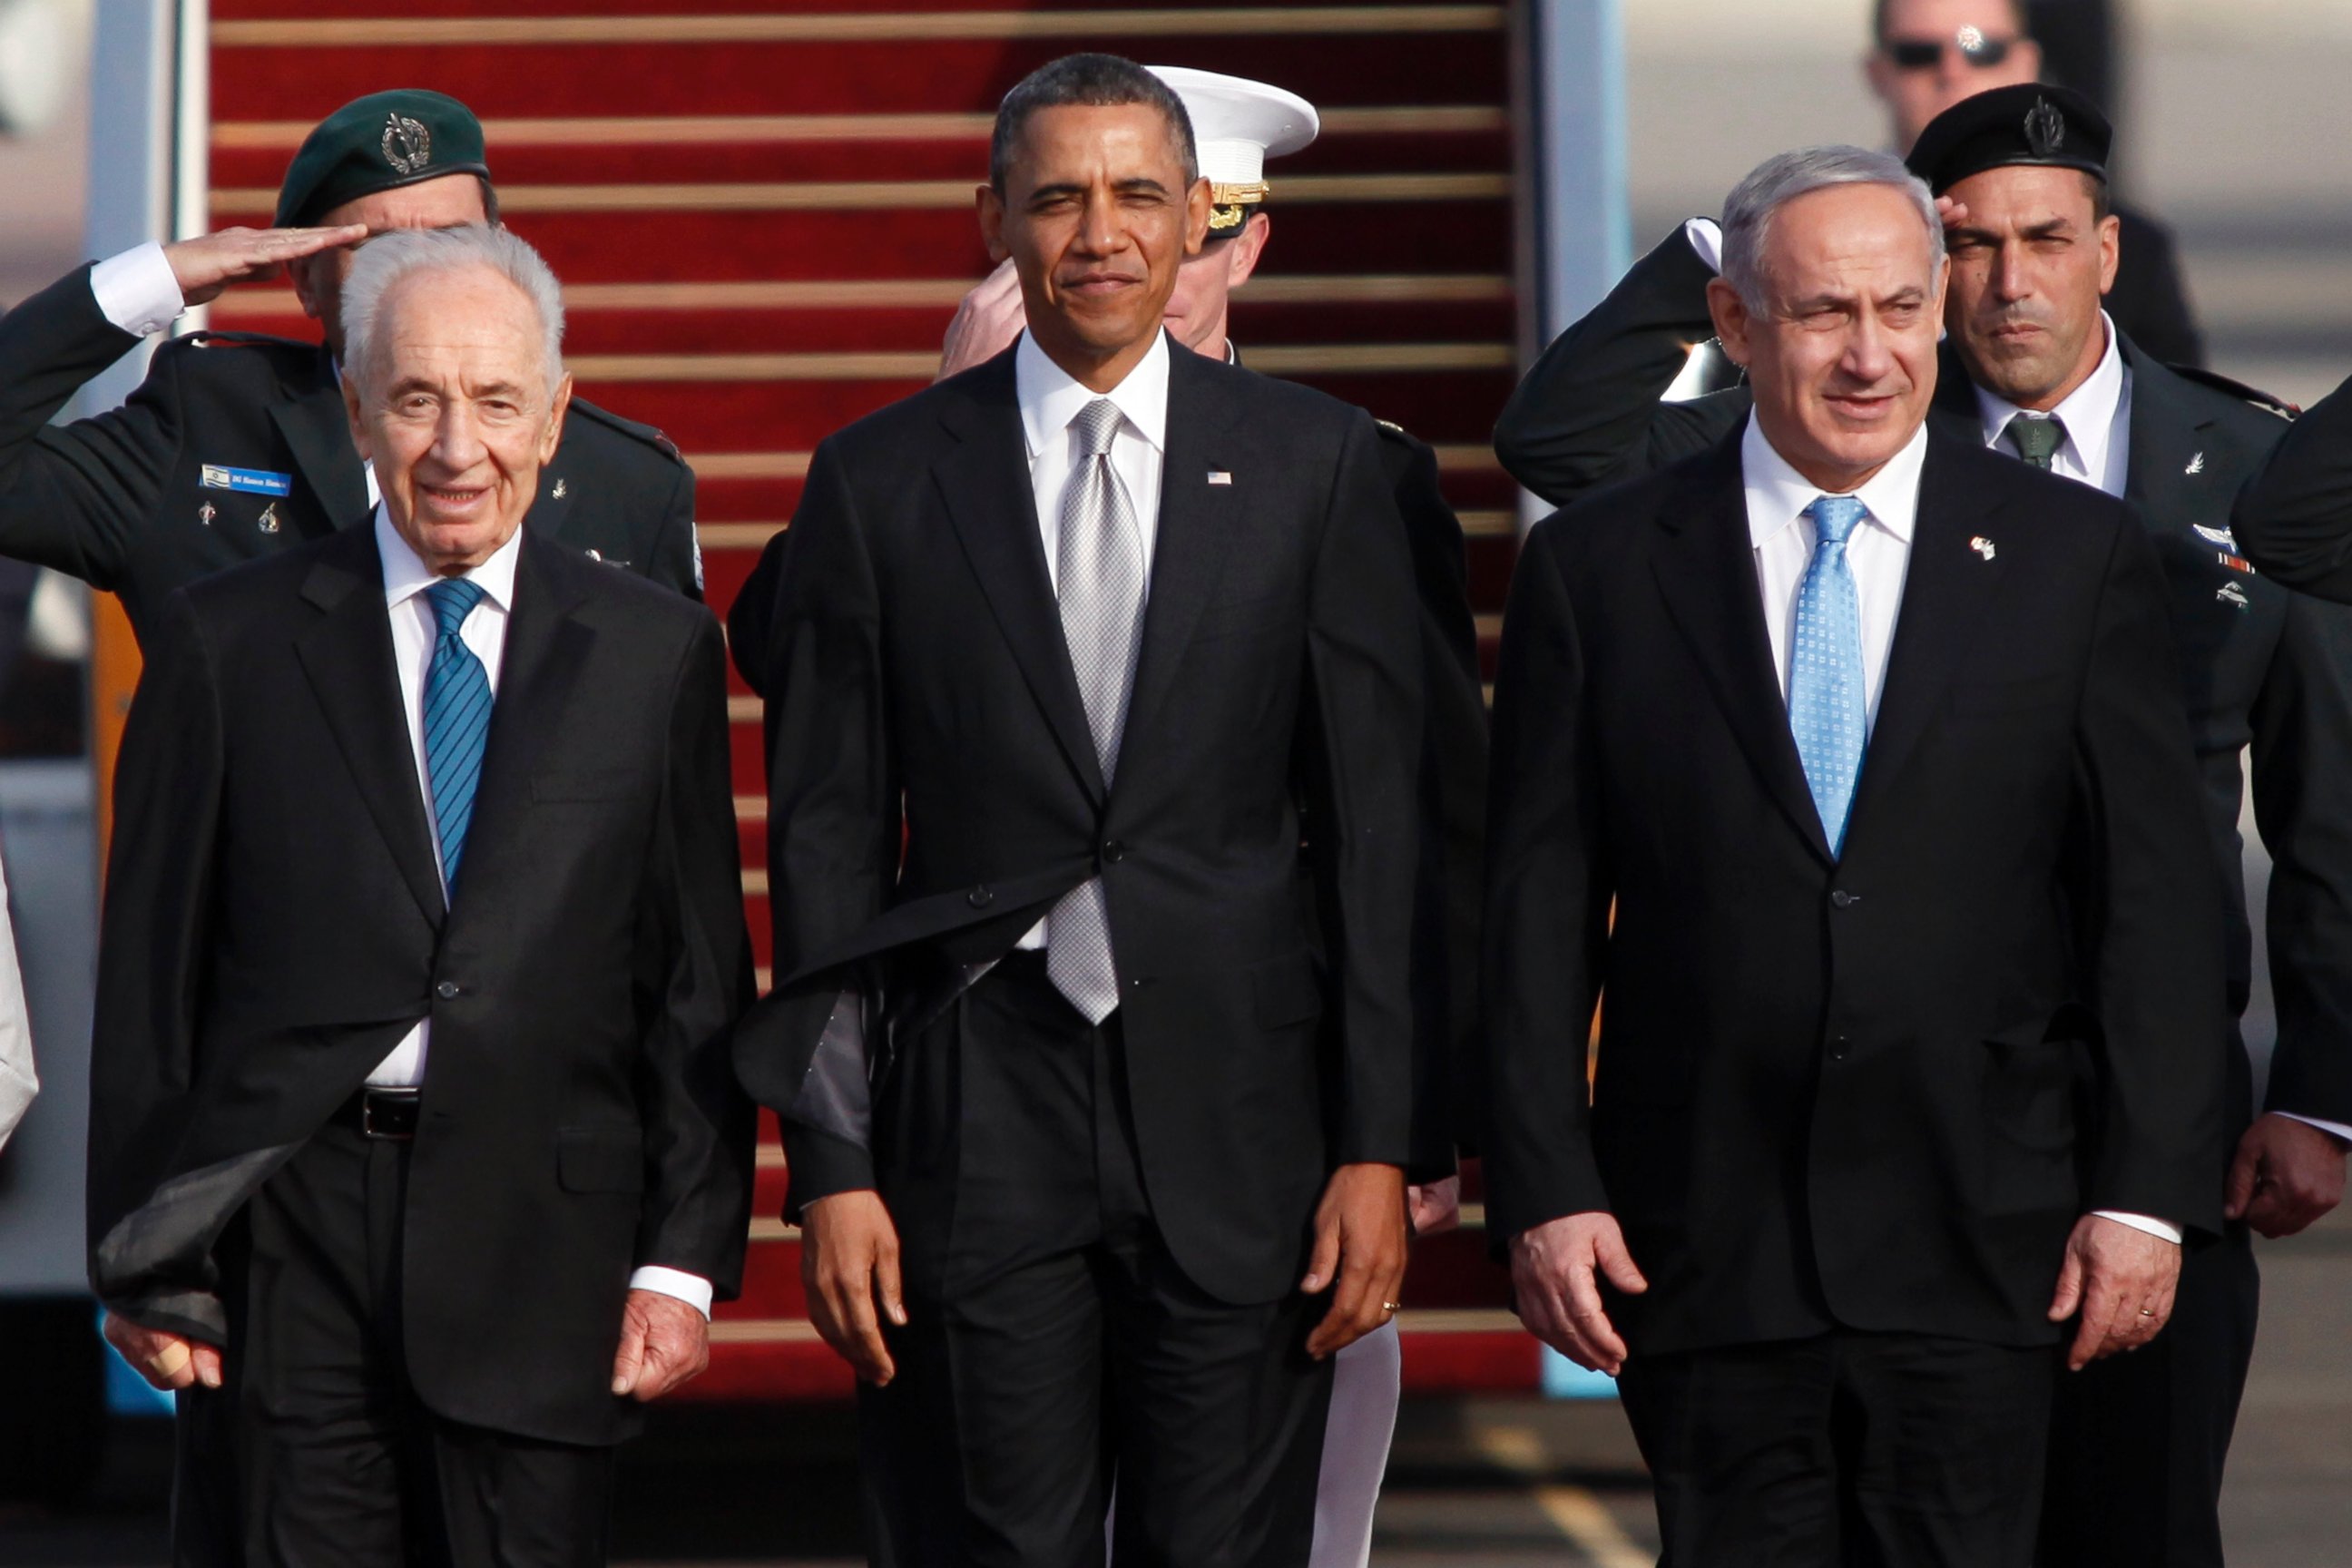 PHOTO: Israeli President Shimon Peres, U.S. President Barack Obama and Israeli Prime Minister Benjamin Netanyahu stand together prior to Obama departing from Ben Gurion International Airport, March 22, 2013, in Lod, Israel.